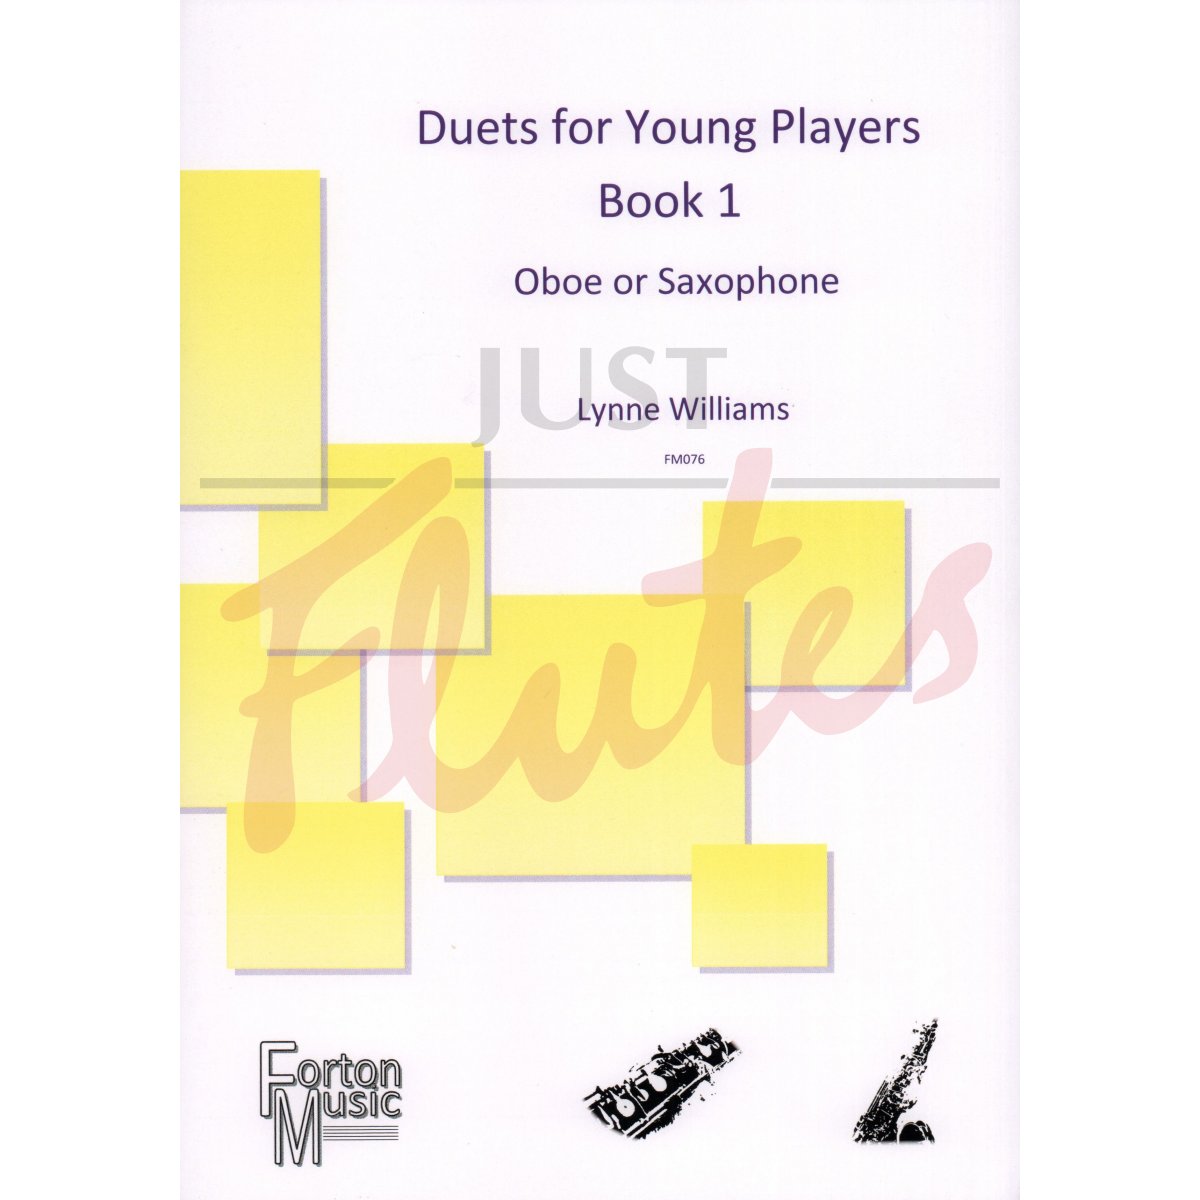 Duets for Young Players Book 1 for Oboe or Saxophone